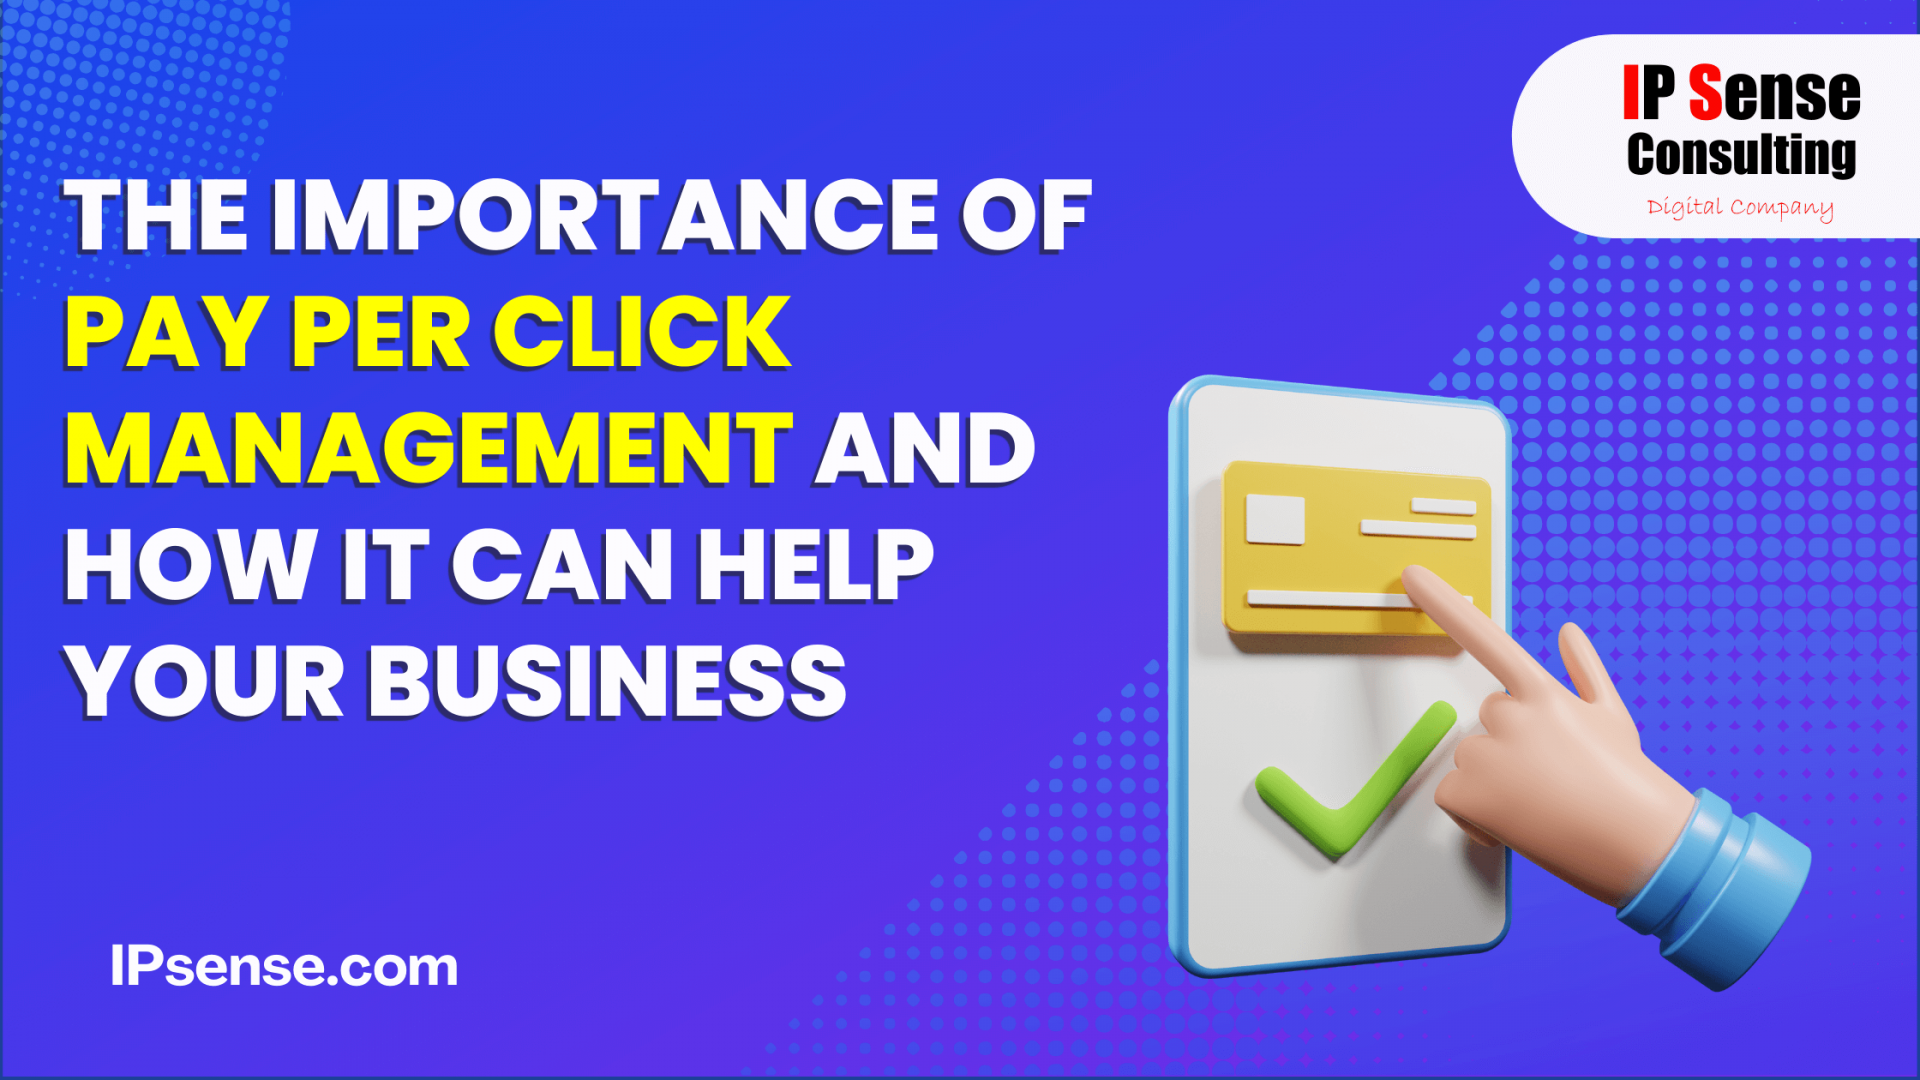 The Importance of Pay Per Click Management and How It Can Help Your Business pay per click management The Importance of Pay Per Click Management 5 reasons why your marketing campaign needs a digital marketing agency 1 2 Blog 5 reasons why your marketing campaign needs a digital marketing agency 1 2